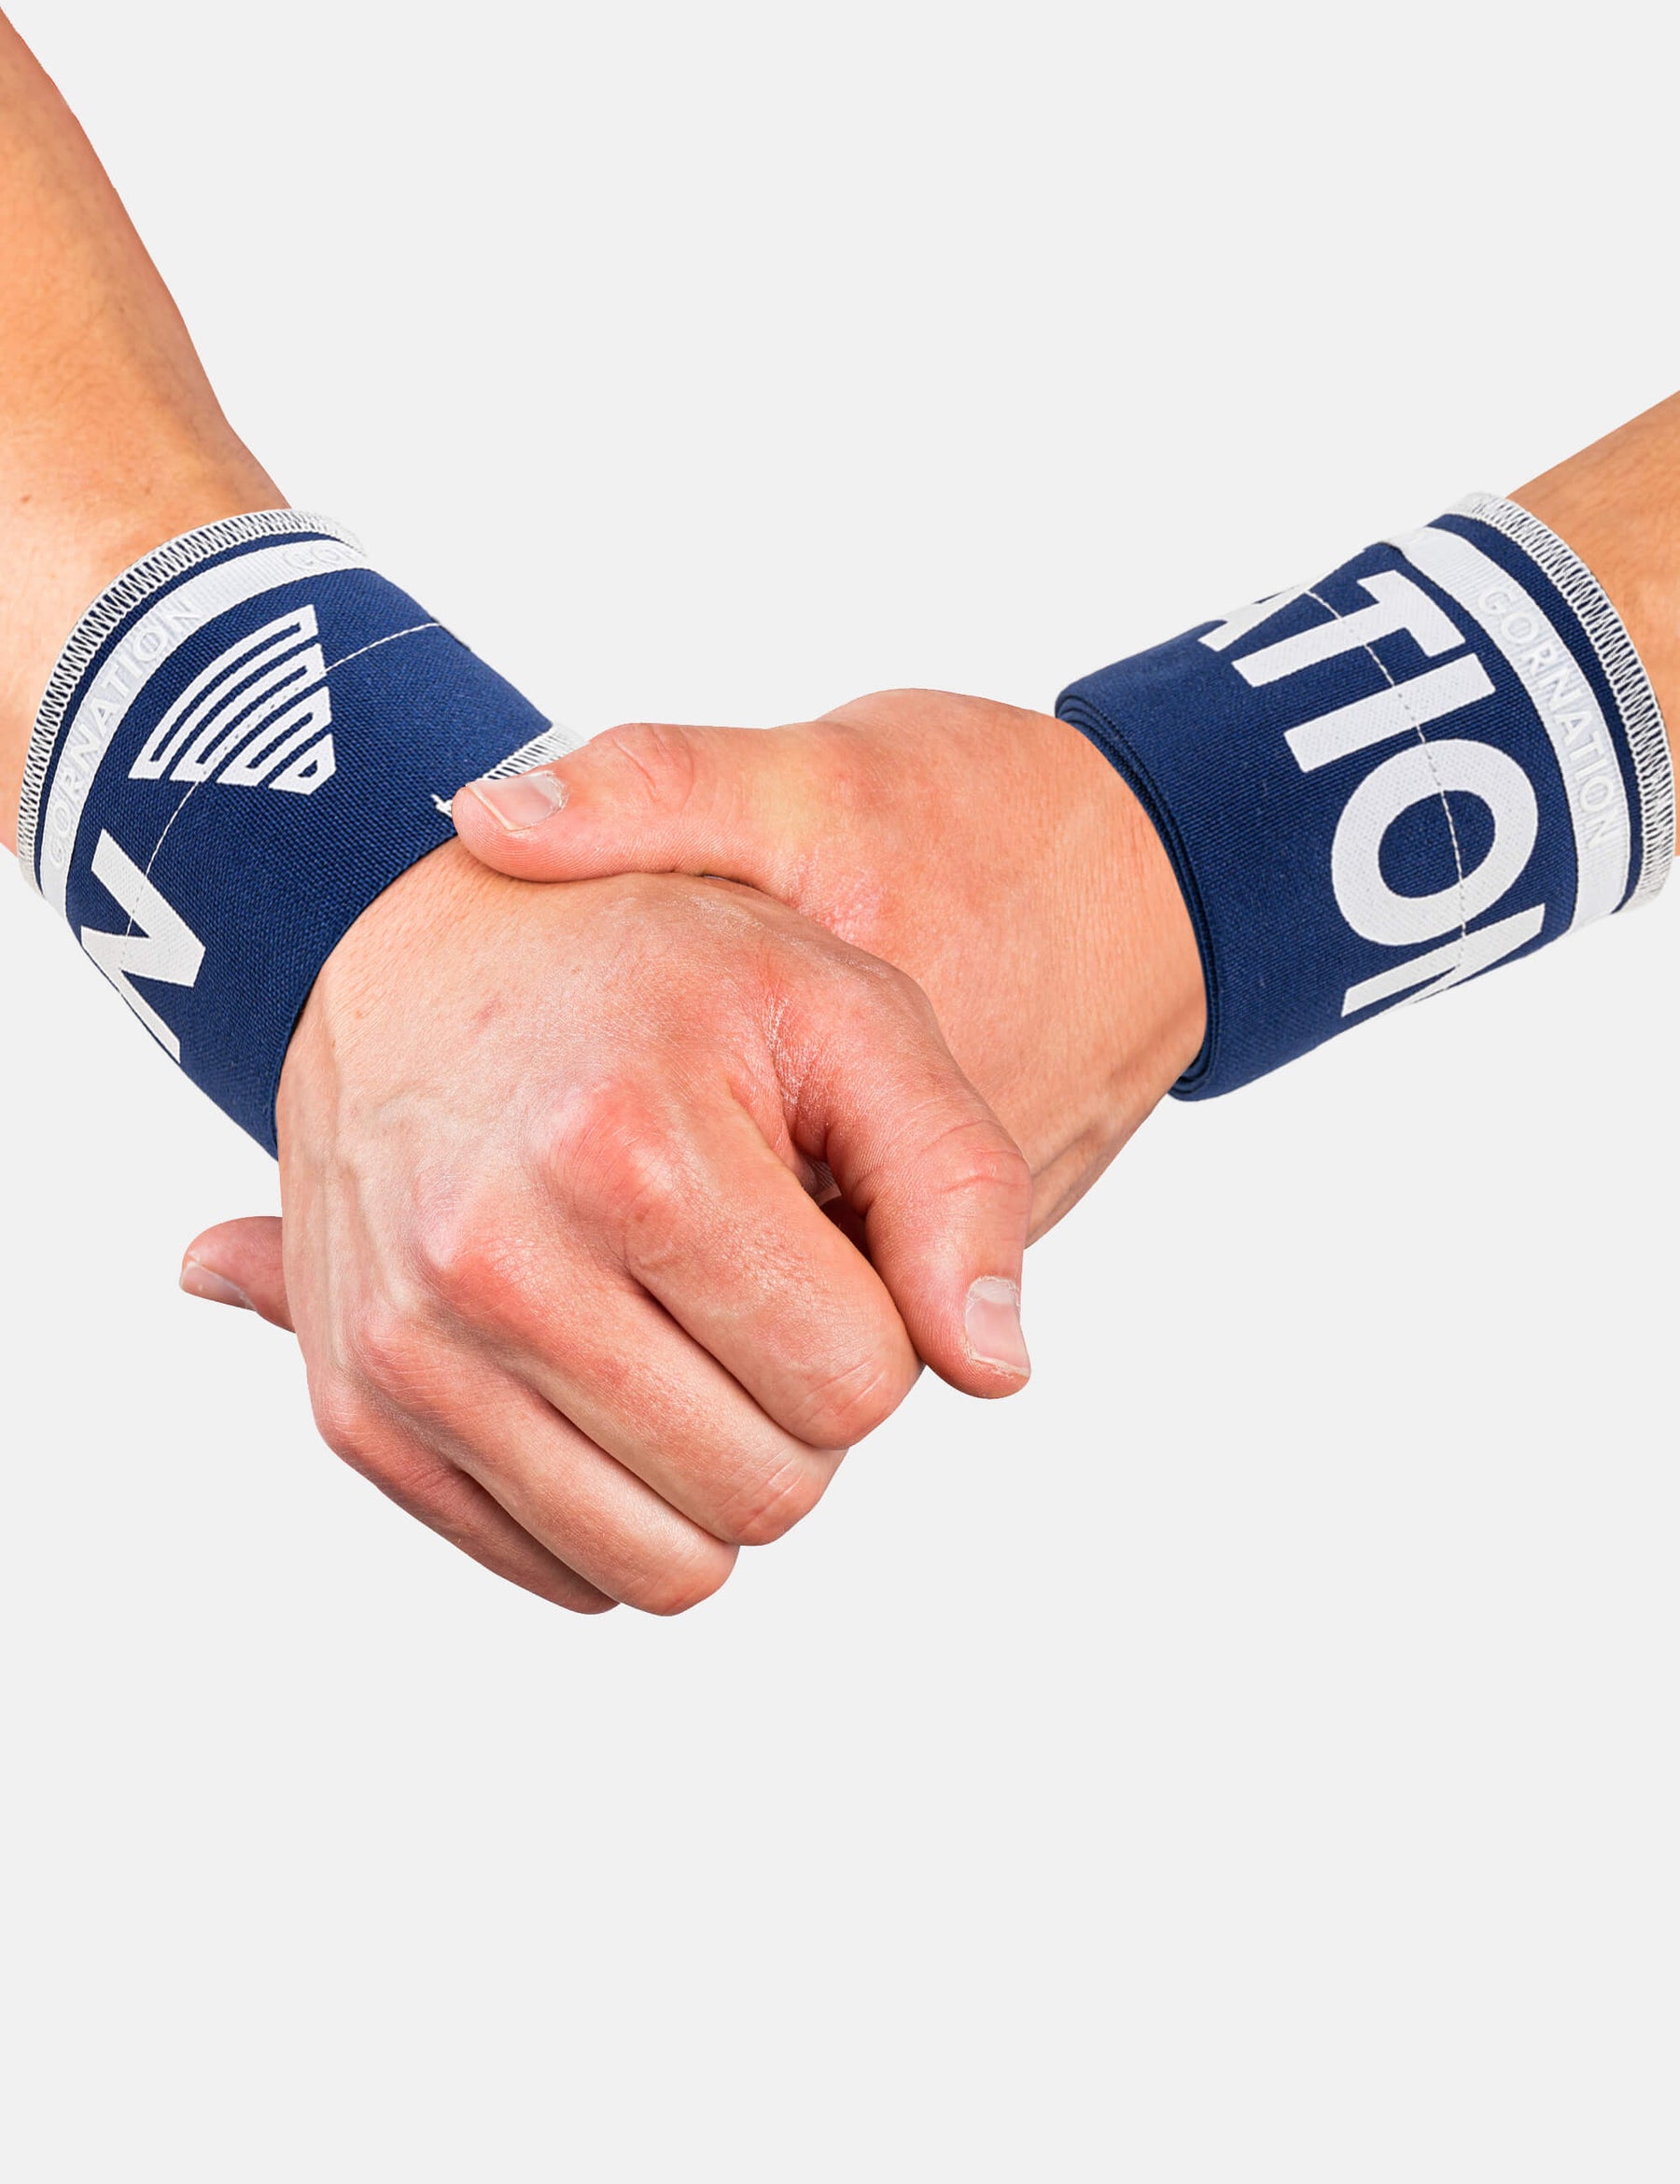 Performance Wrist Wraps – Ultimate Joint Support